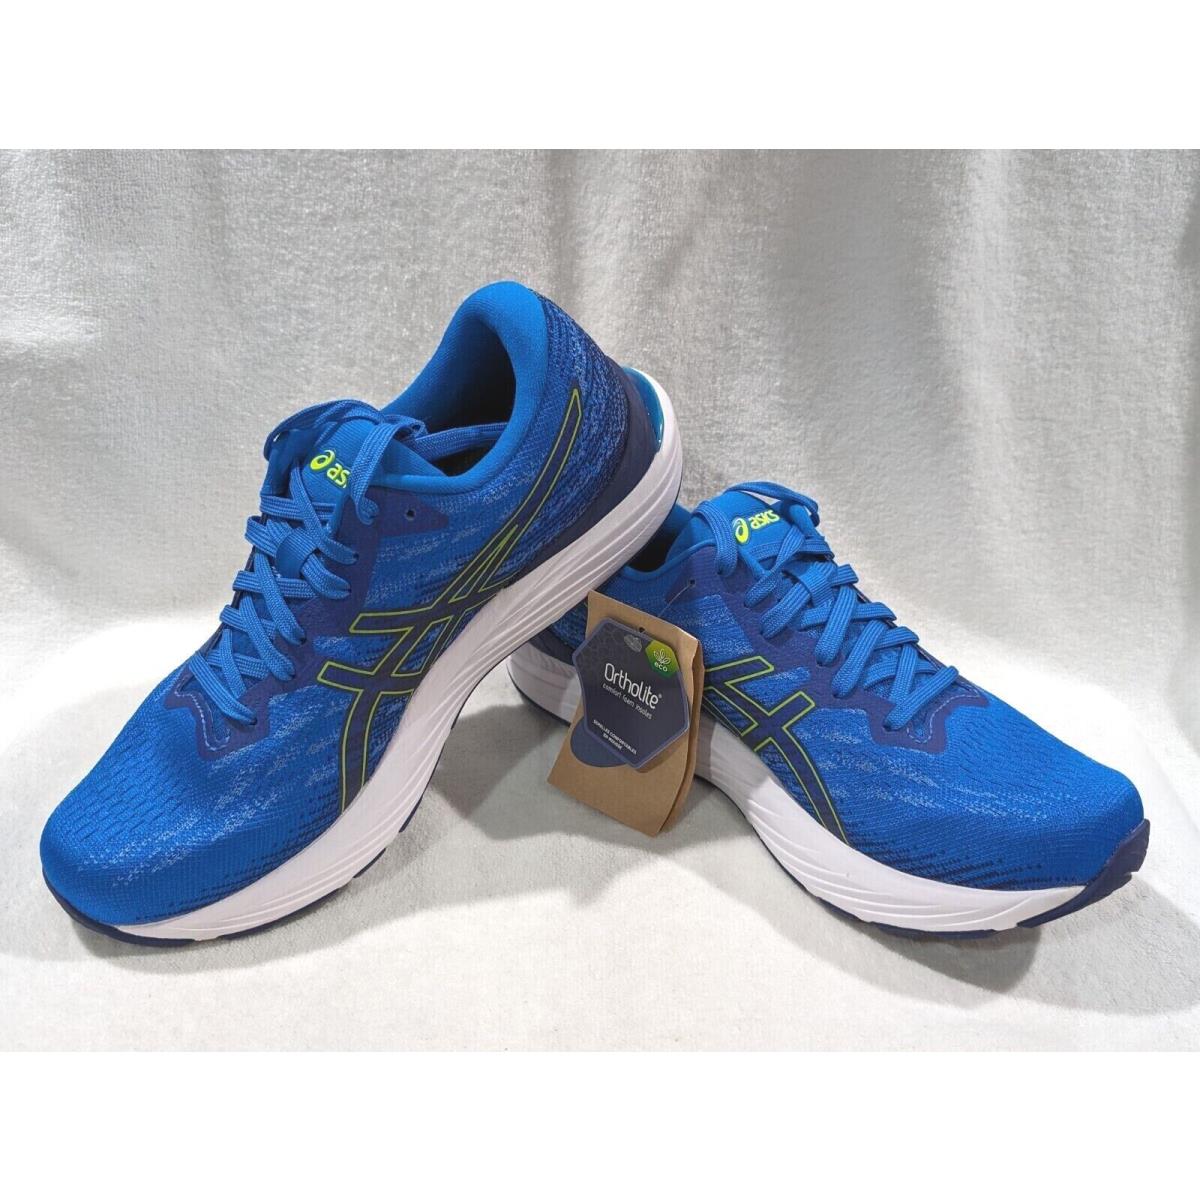 Asics Men`s Gel-stratus 3 Knit Electric Blue/s-yellow Running Shoes-size 10.5 NB